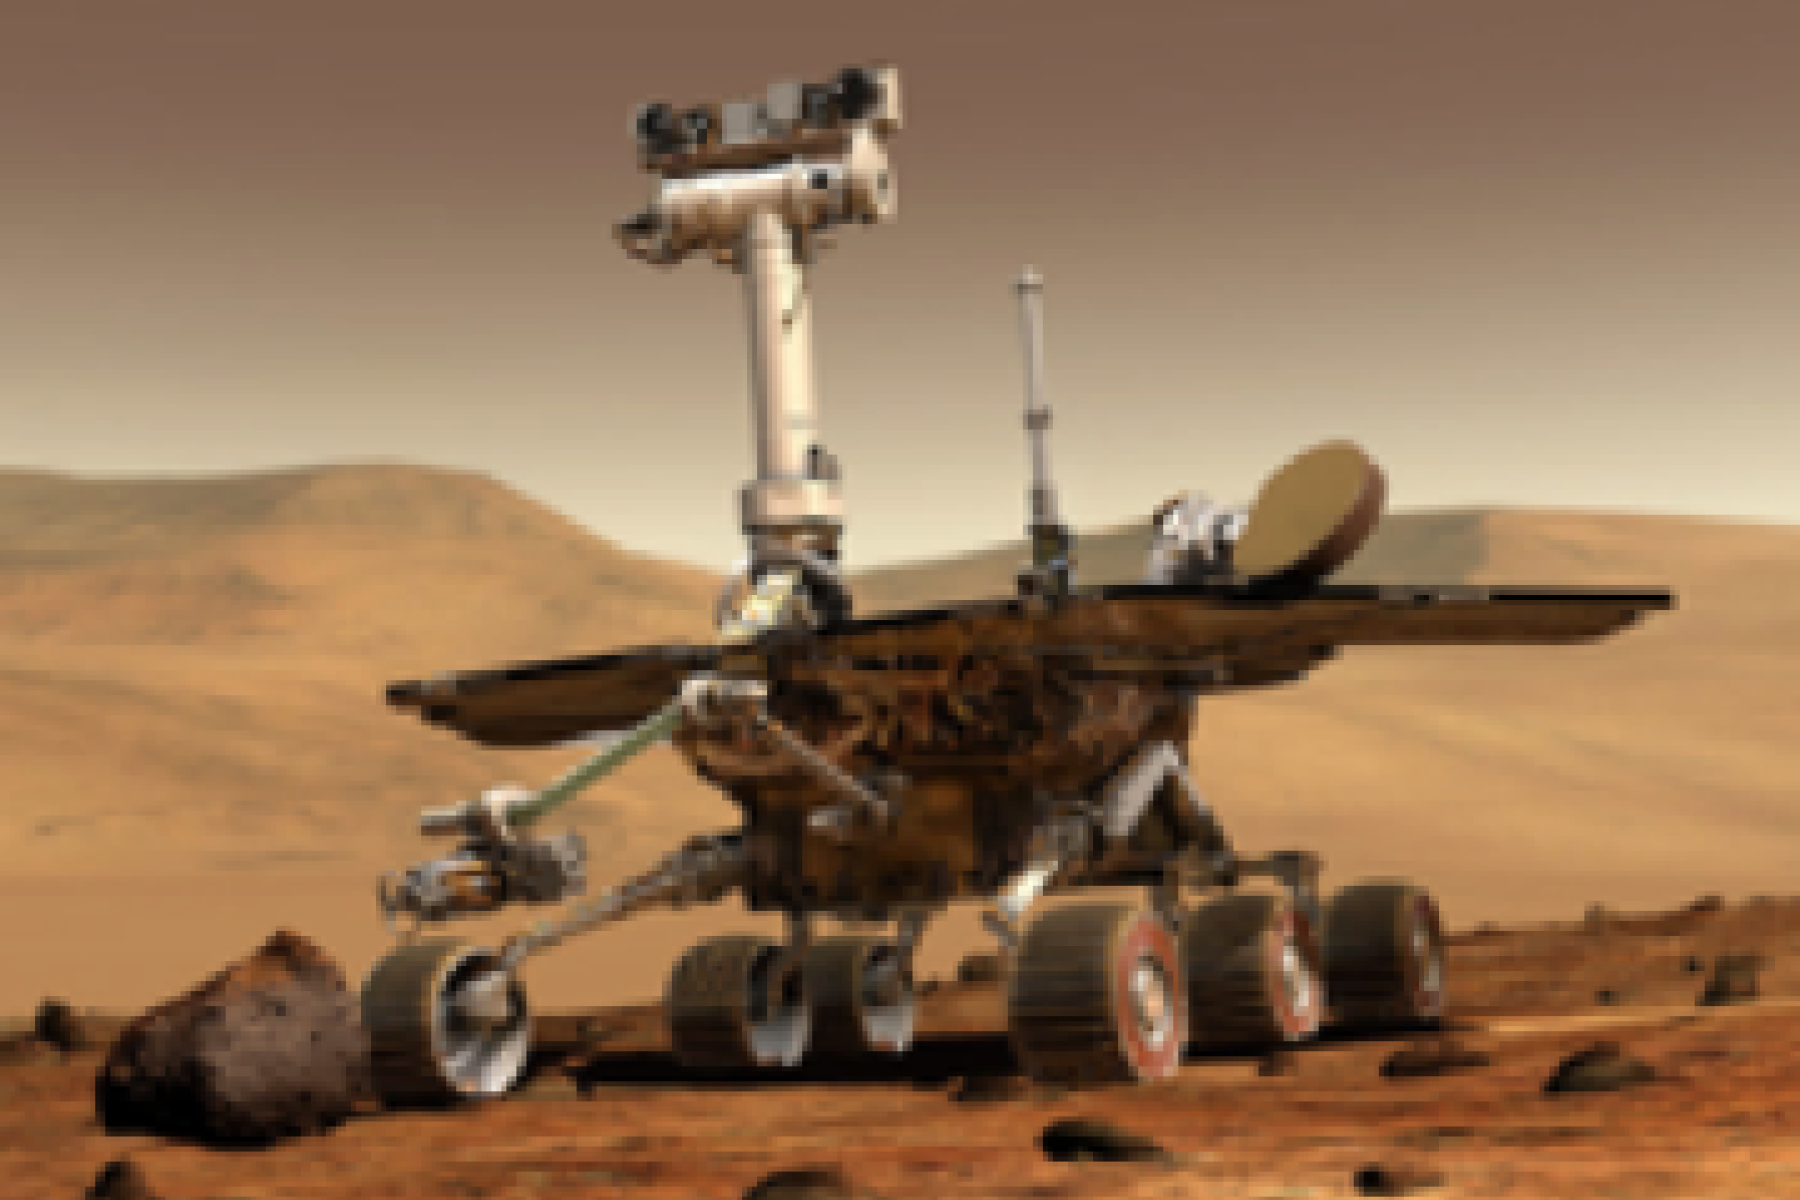 Artistic rendering of a rover on Mars